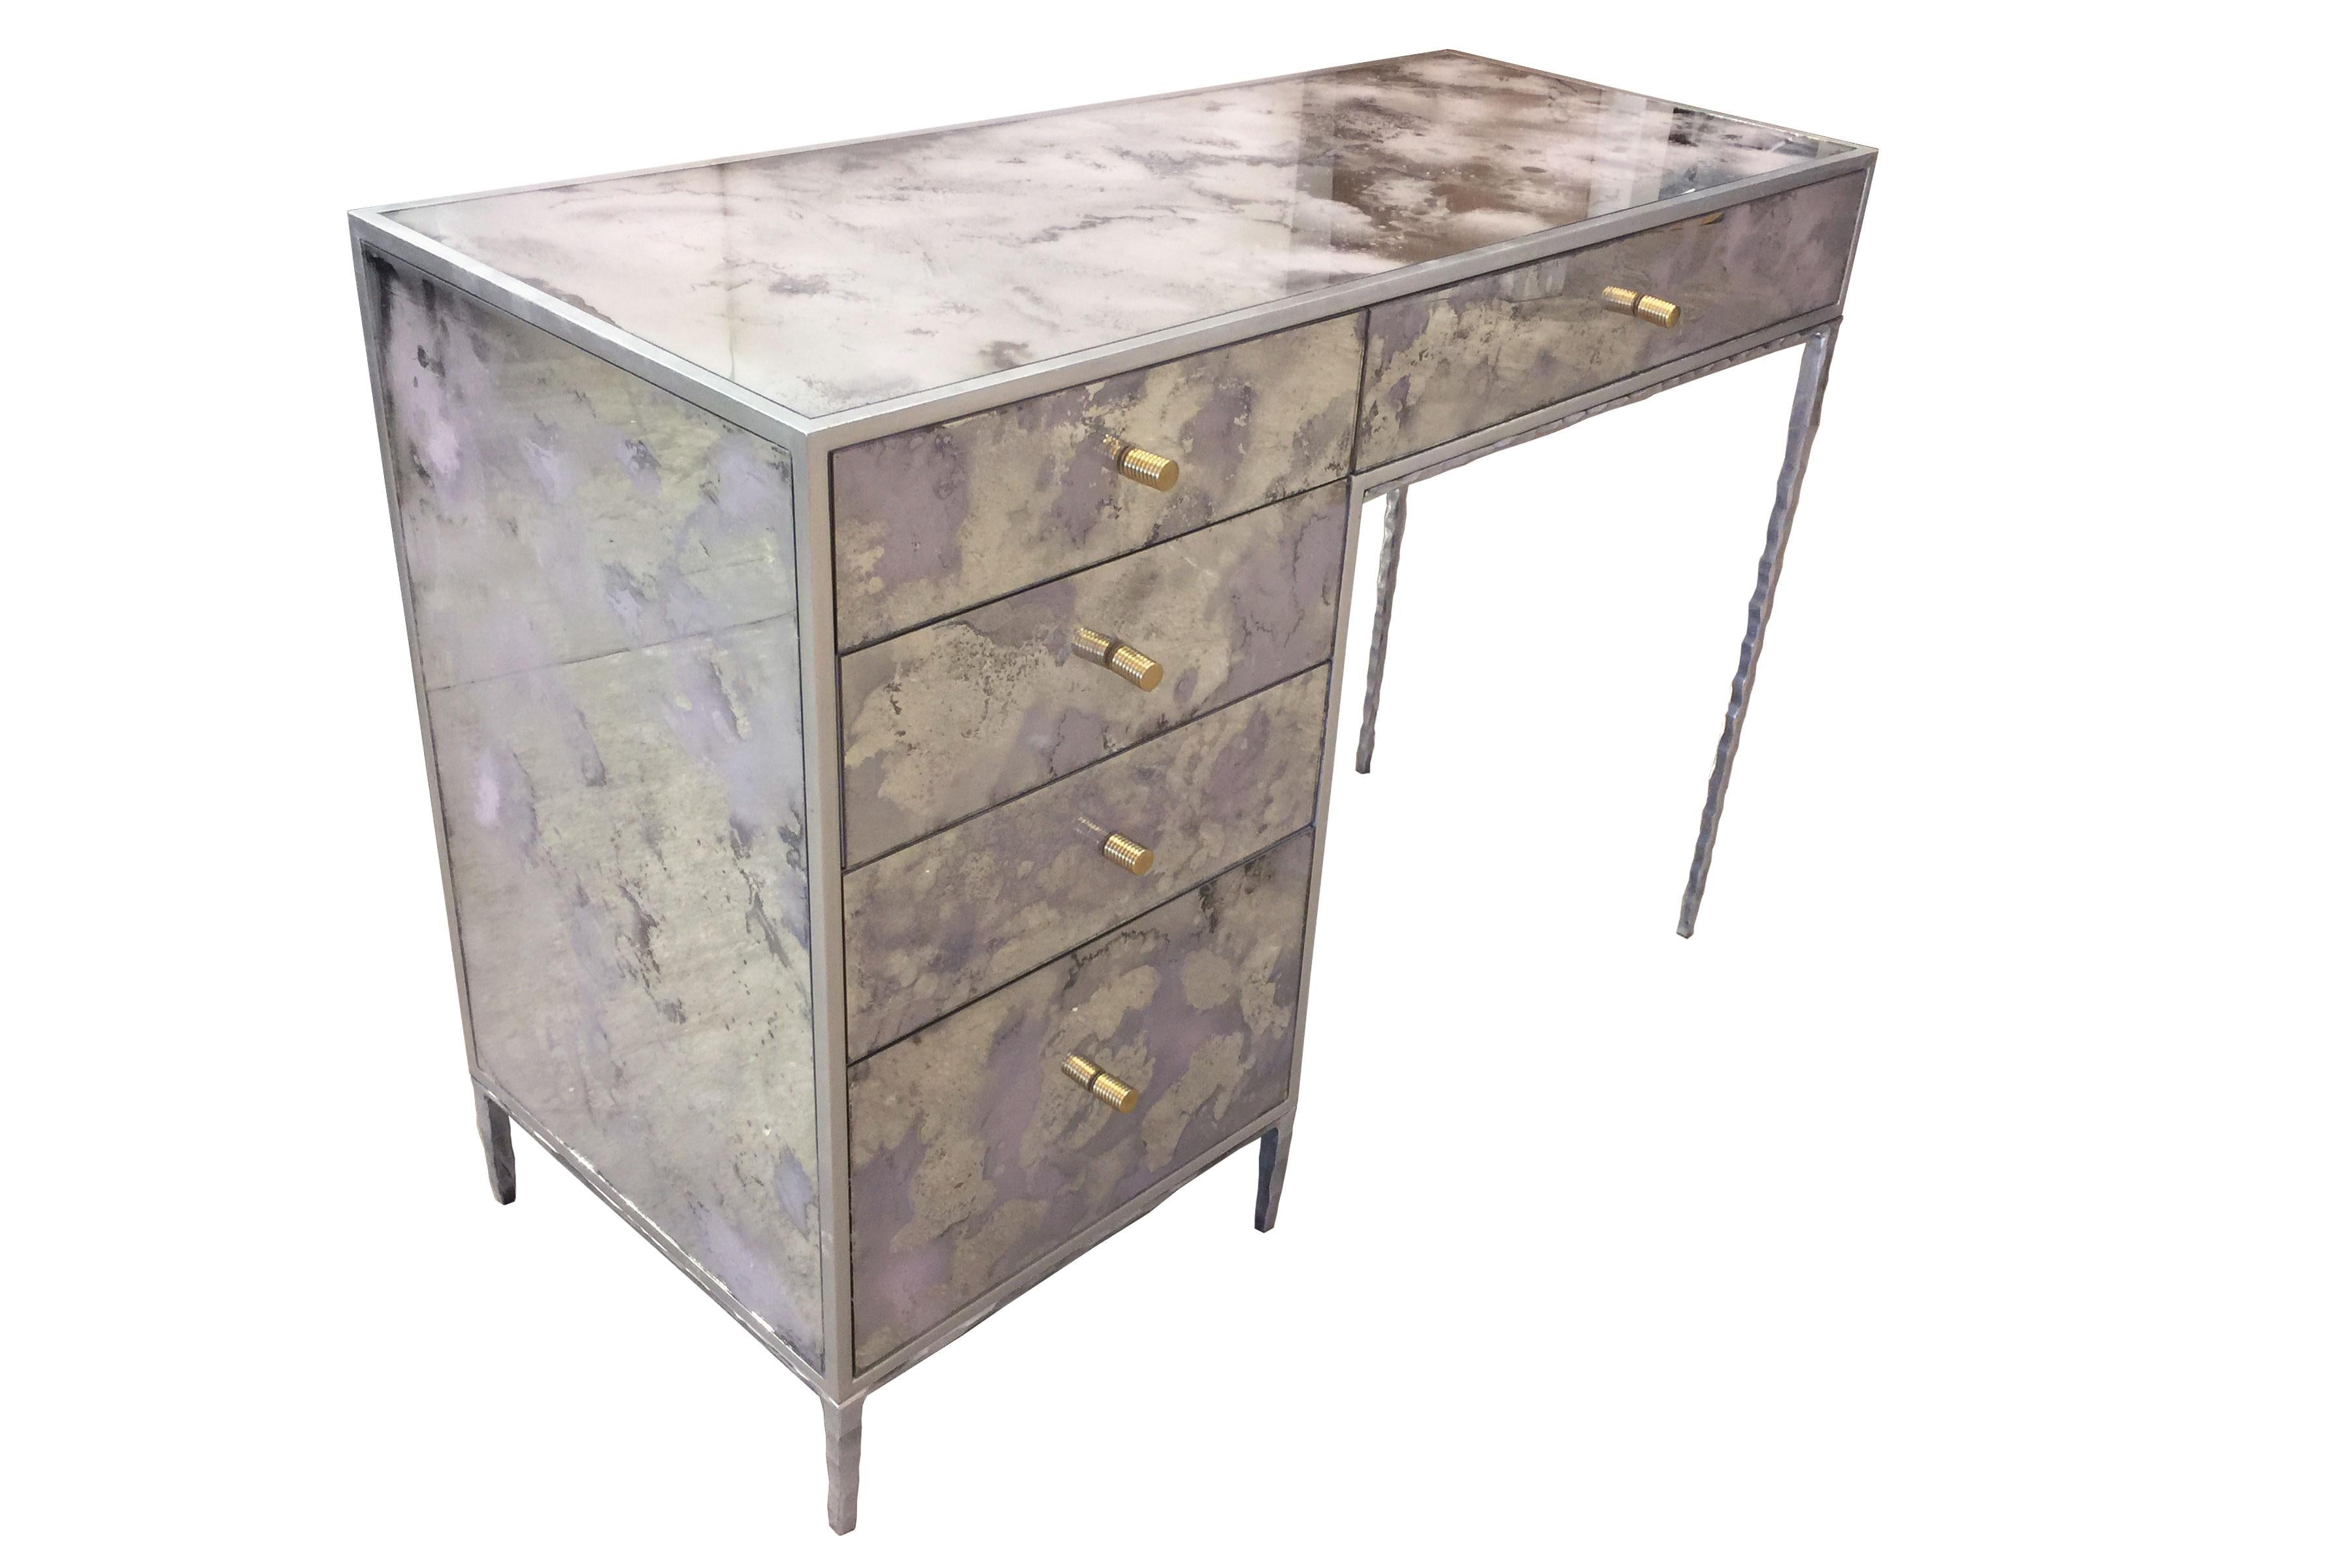 The églomisé pink dust vanity by Ercole Home has a 5-drawer, with silver leaf wood finish. Hand painted églomisé glass panels are inset on the surface.
There are five metal pulls in brass finish.
The hand-hammered metal base is in silver